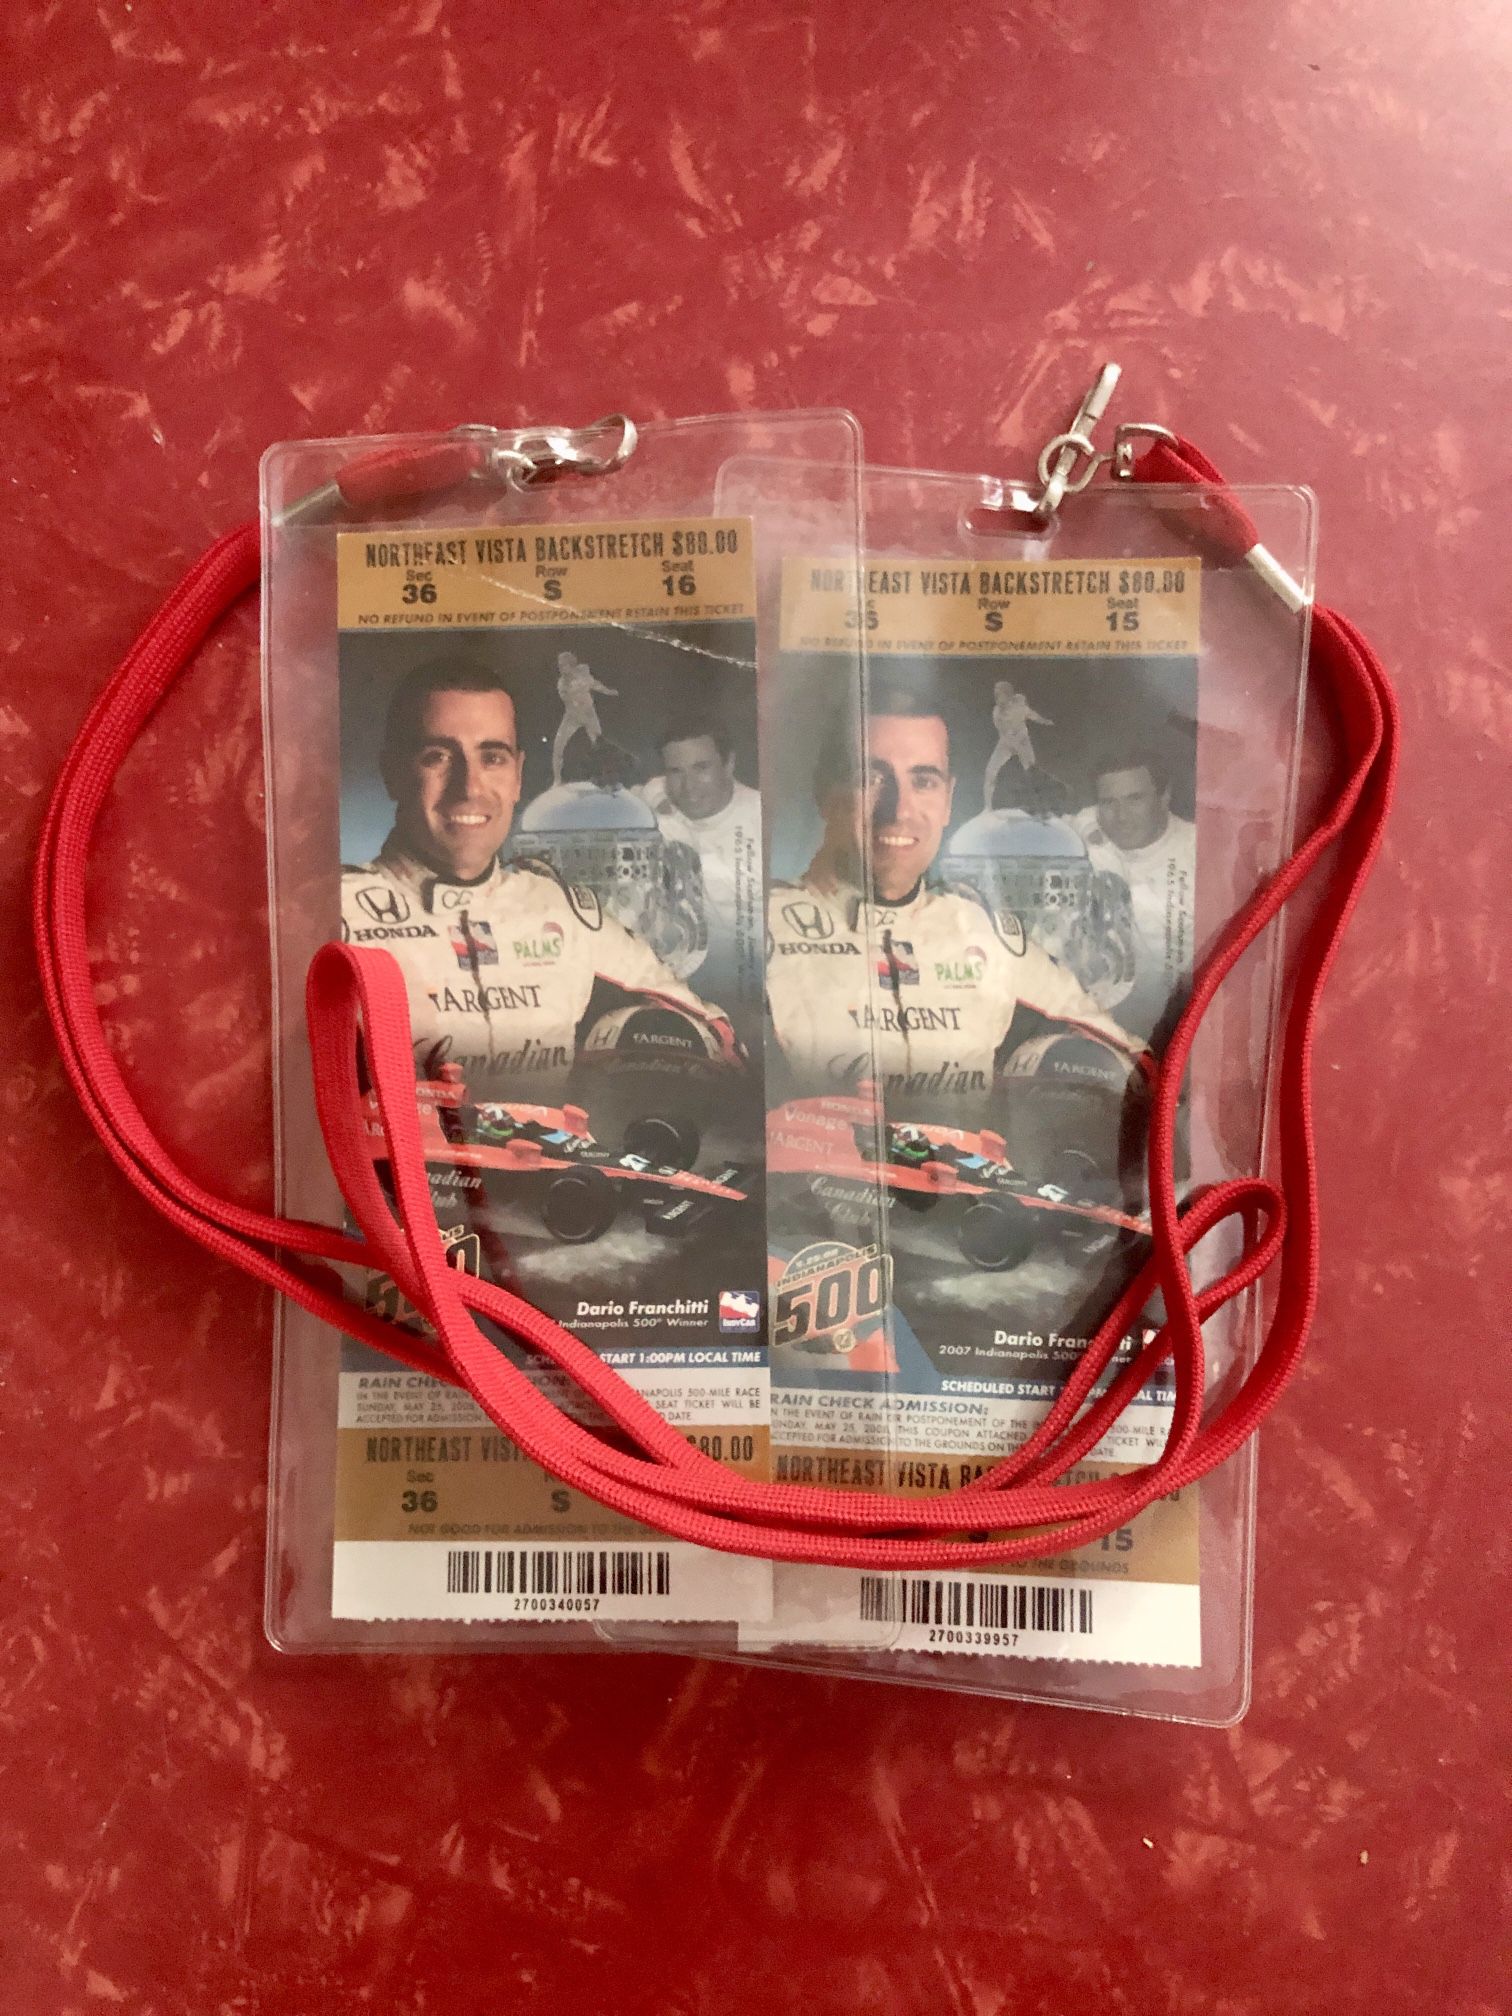 Pair Of 2008 Indy 500 Tickets w/Lanyards